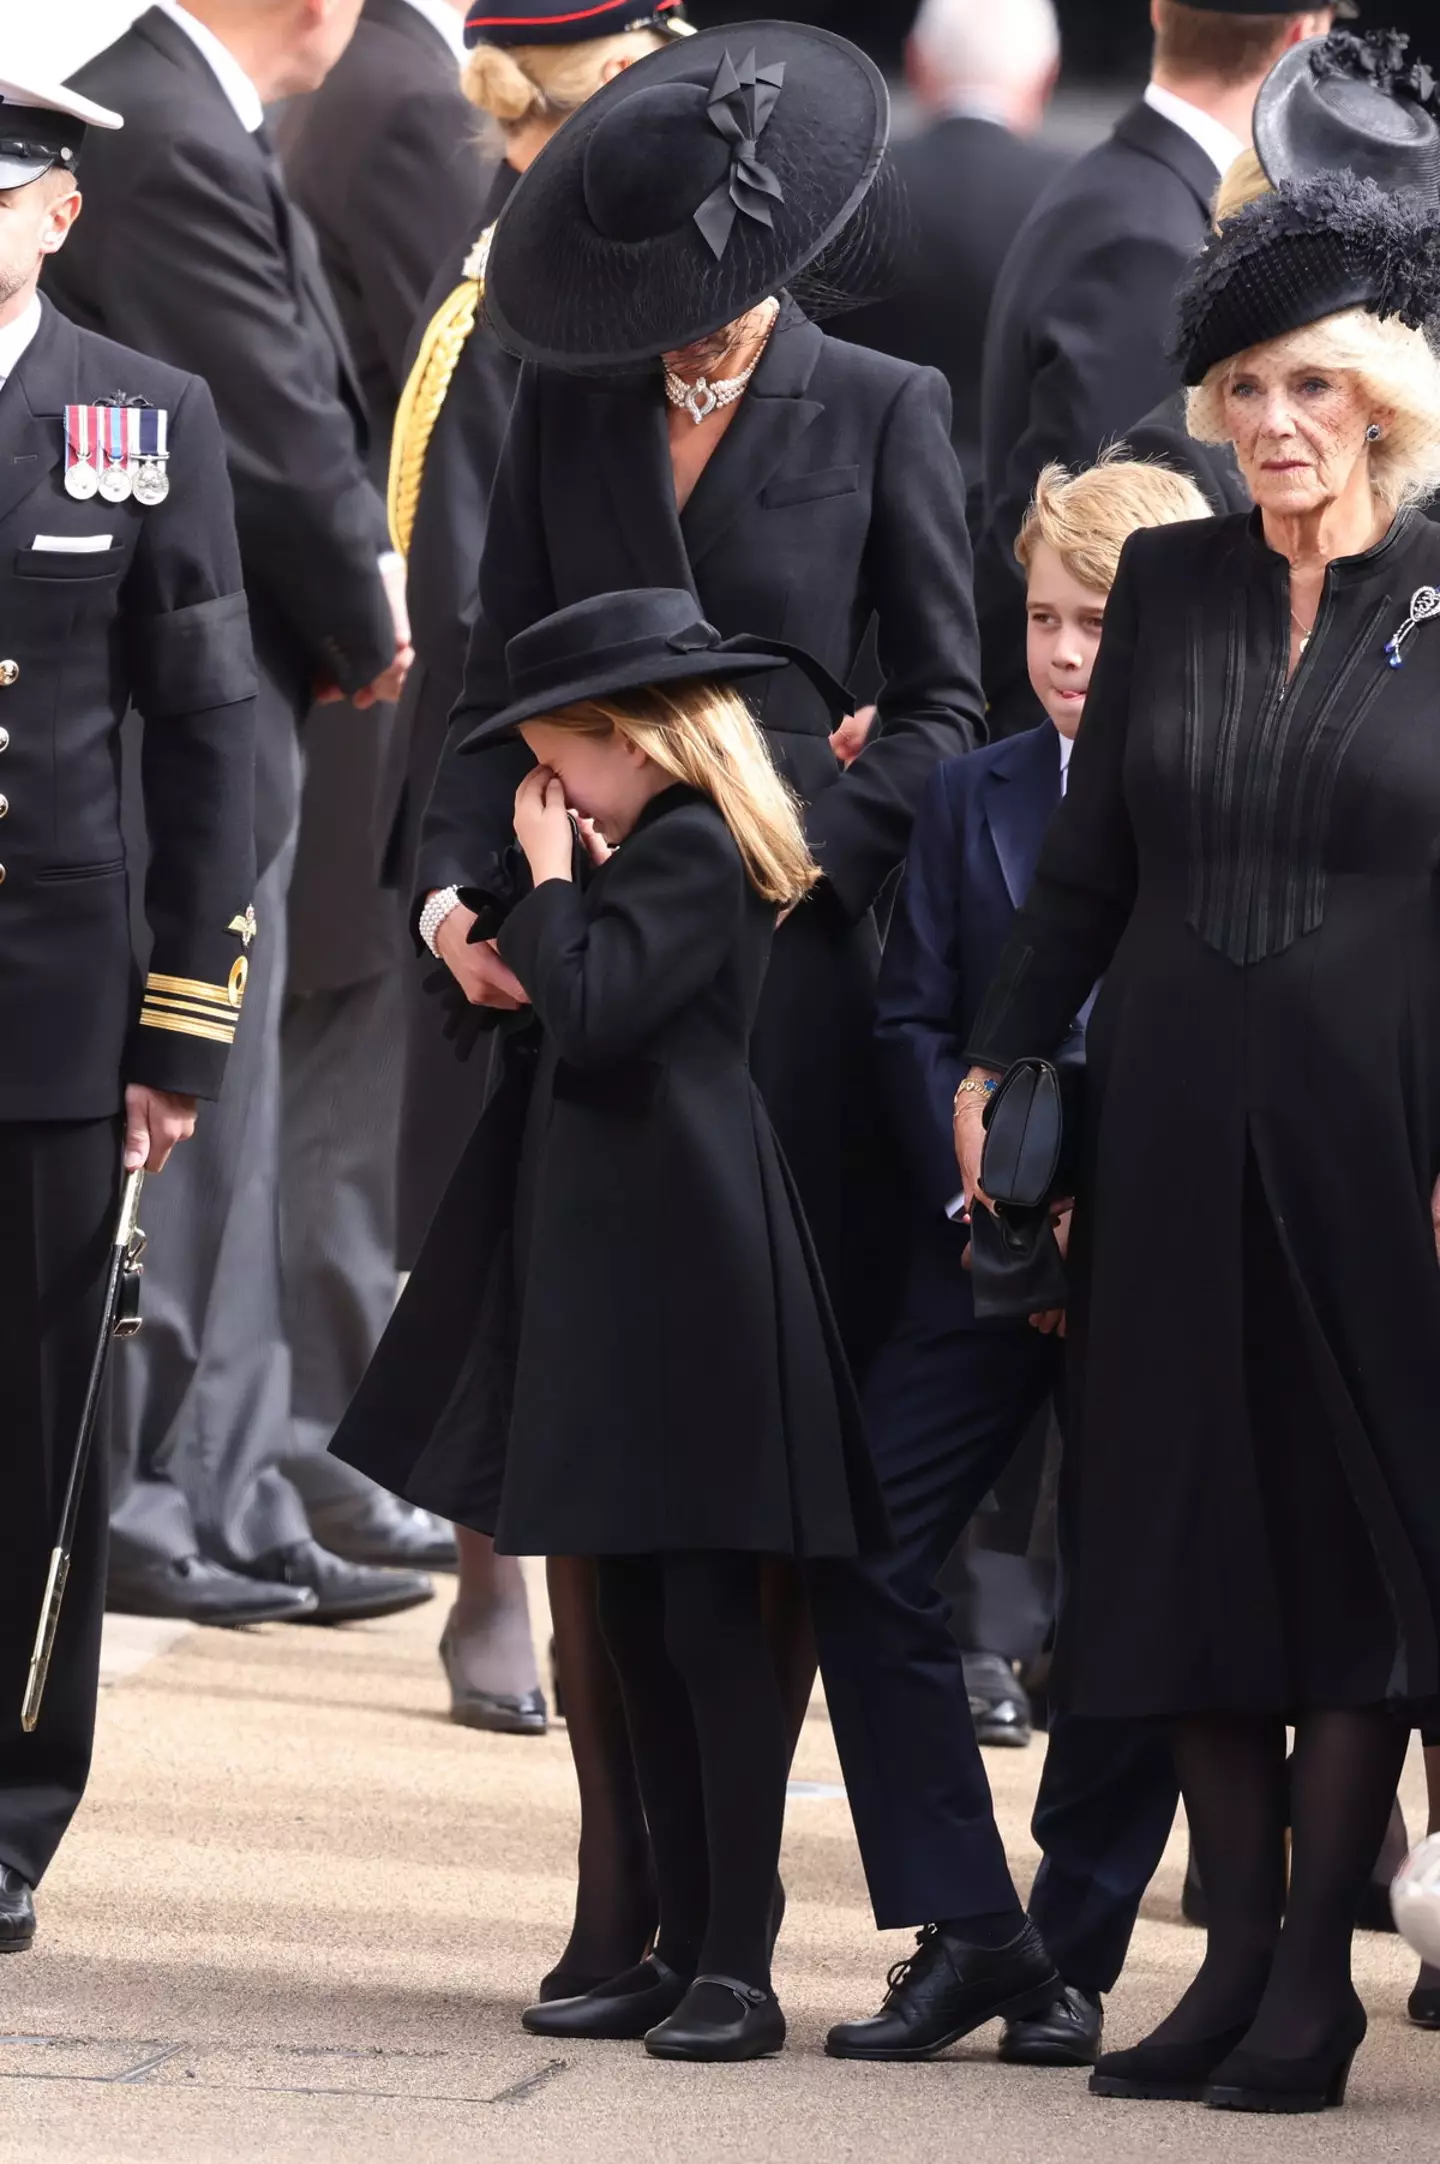 Princess Charlotte was comforted by her mother.